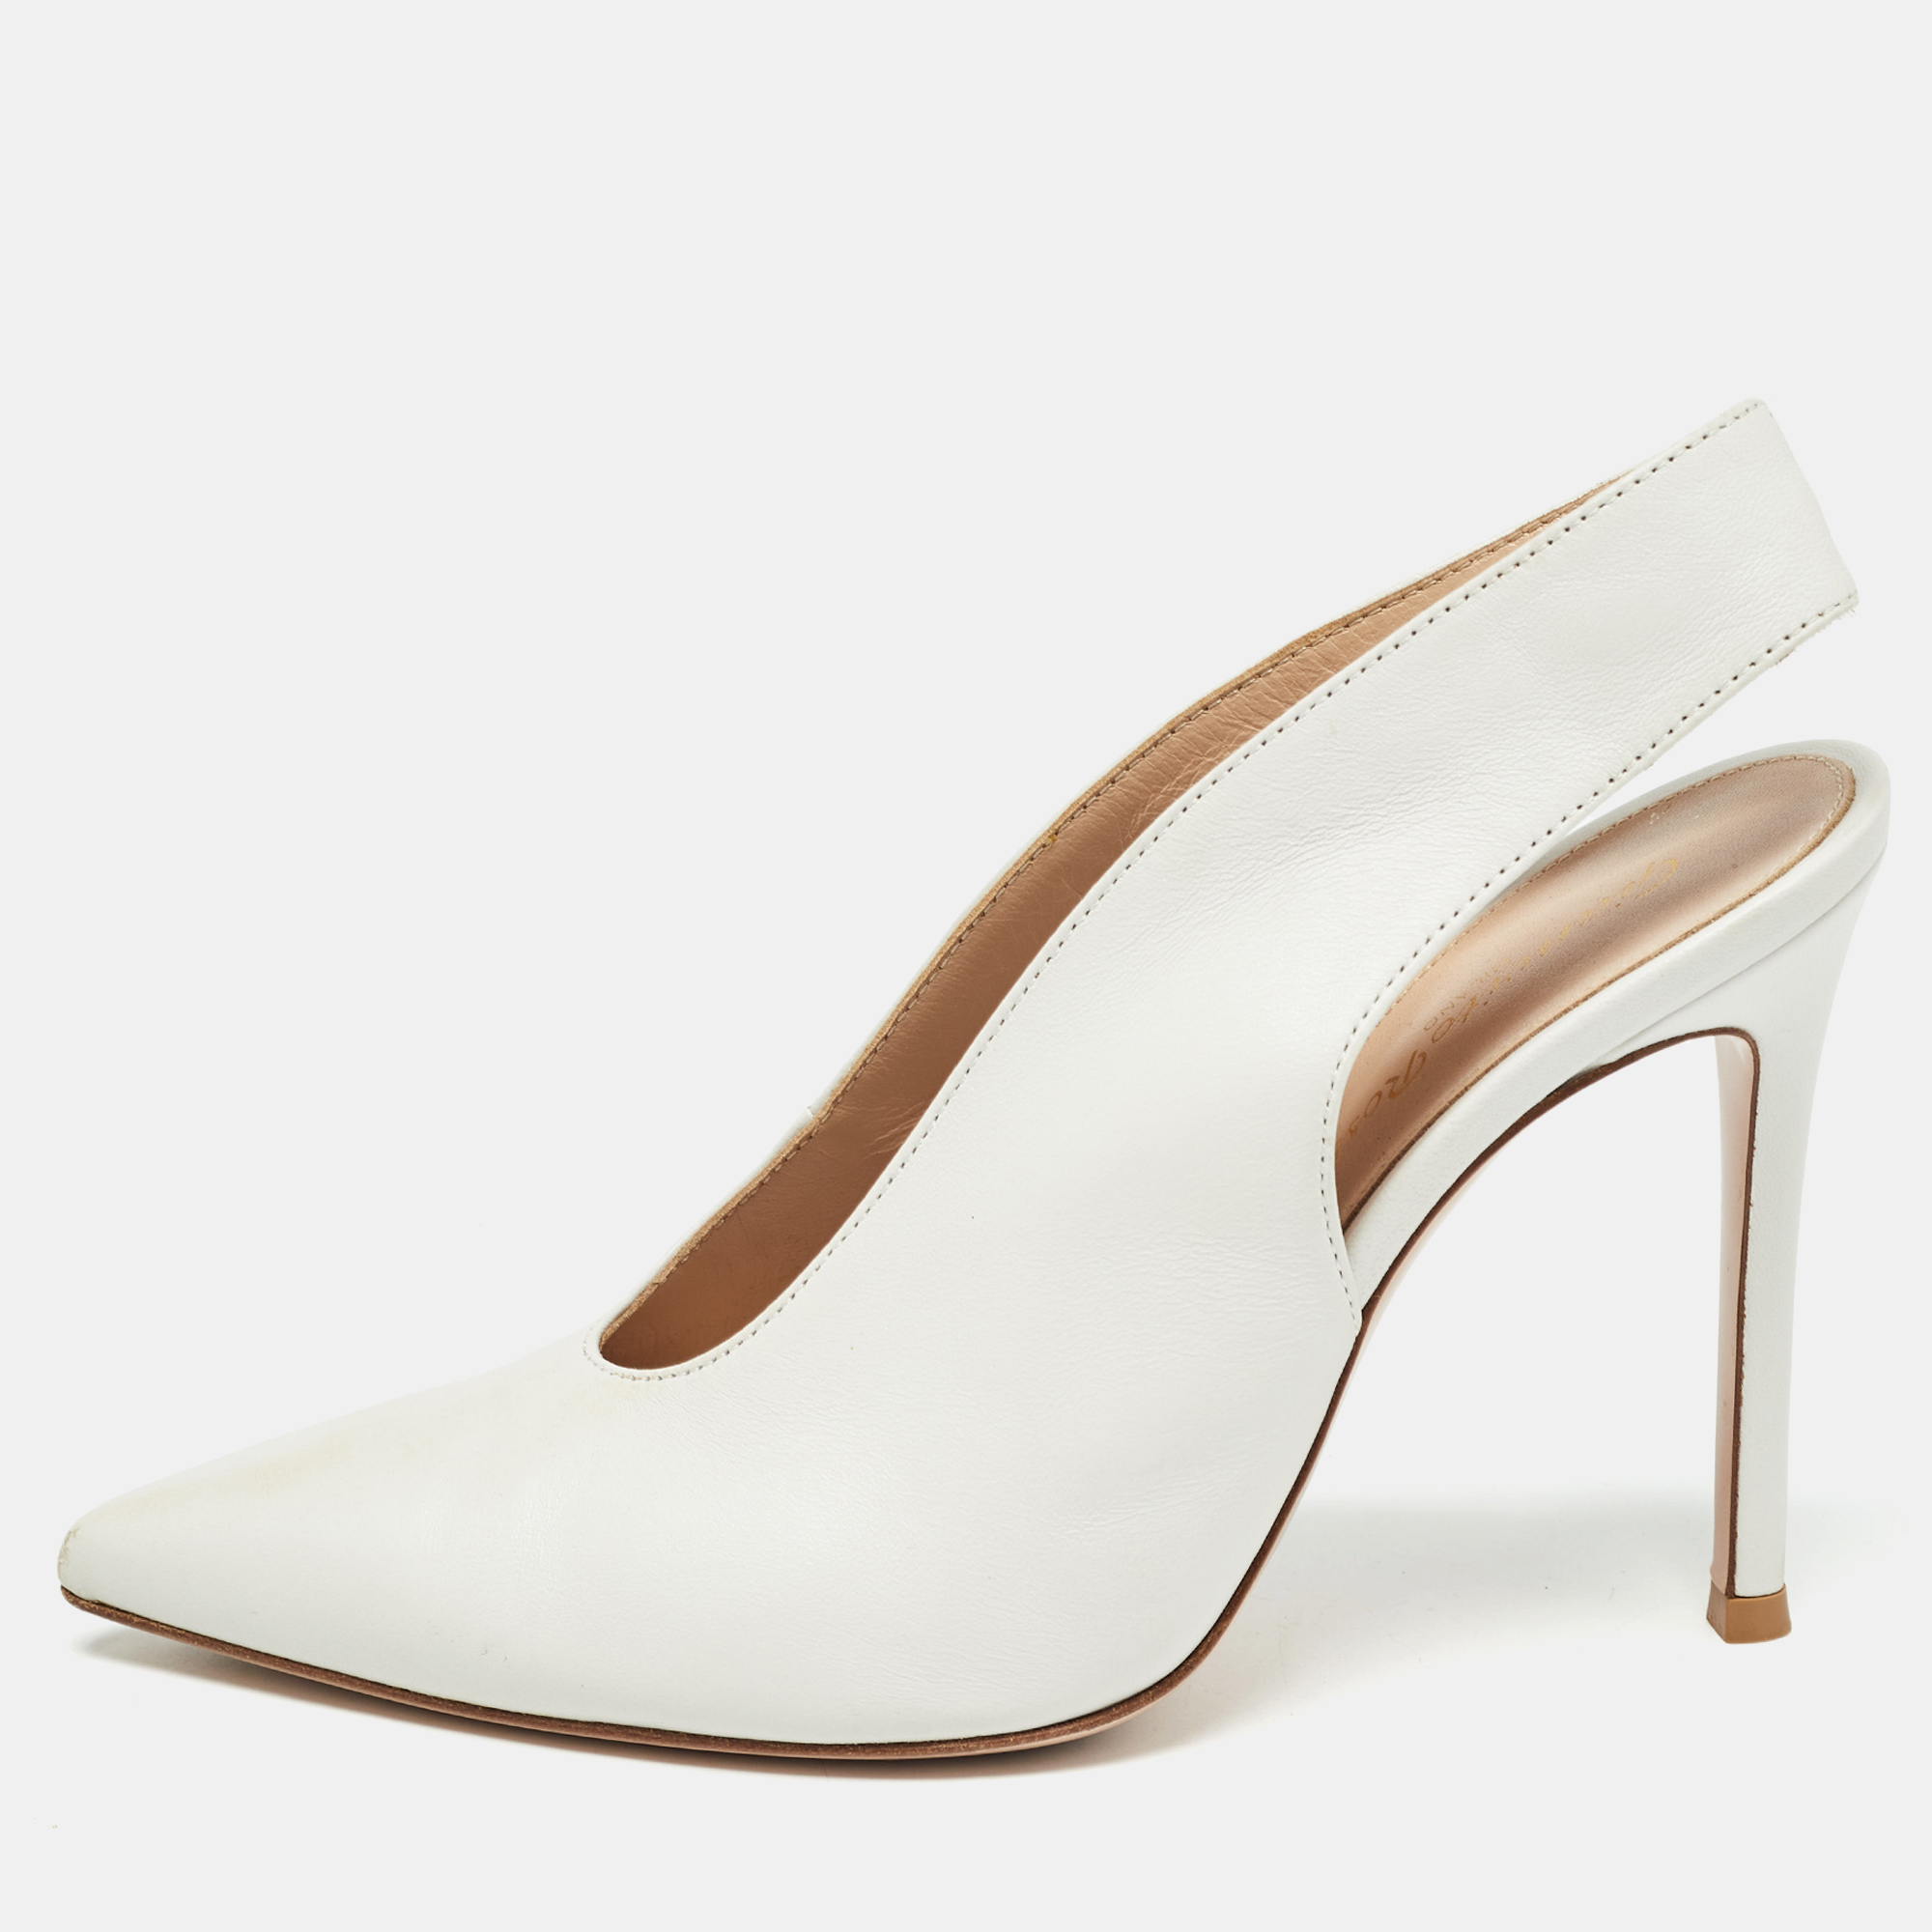 Gianvito rossi white leather pointed toe slingback pumps size 36